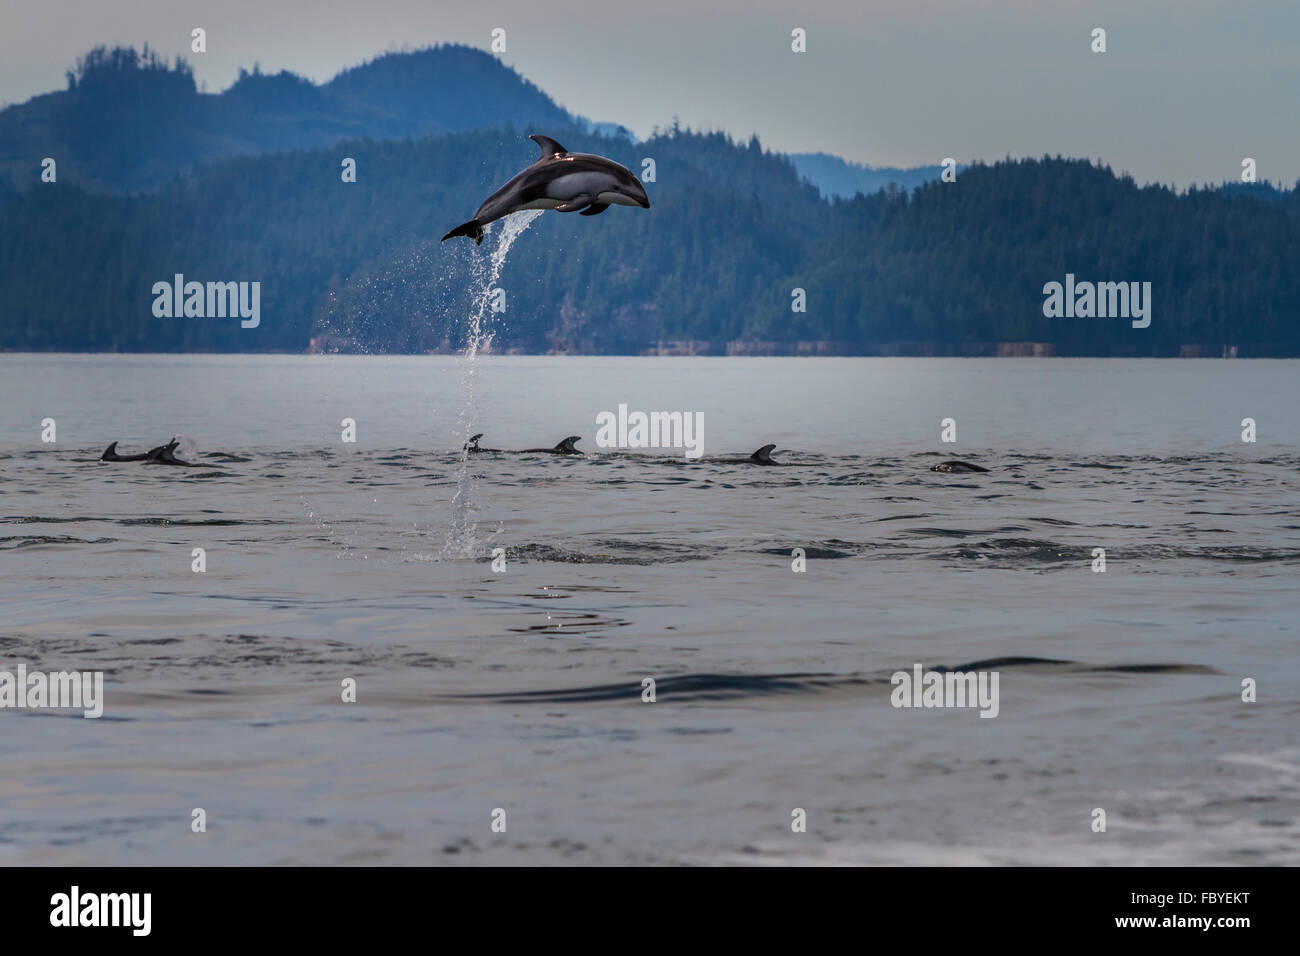 Pacific White Sided Dolphin (Lagenorhynchus obliquidens) jumping in Broughton Archipelago Marine Park in British Columbia, Canad Stock Photo